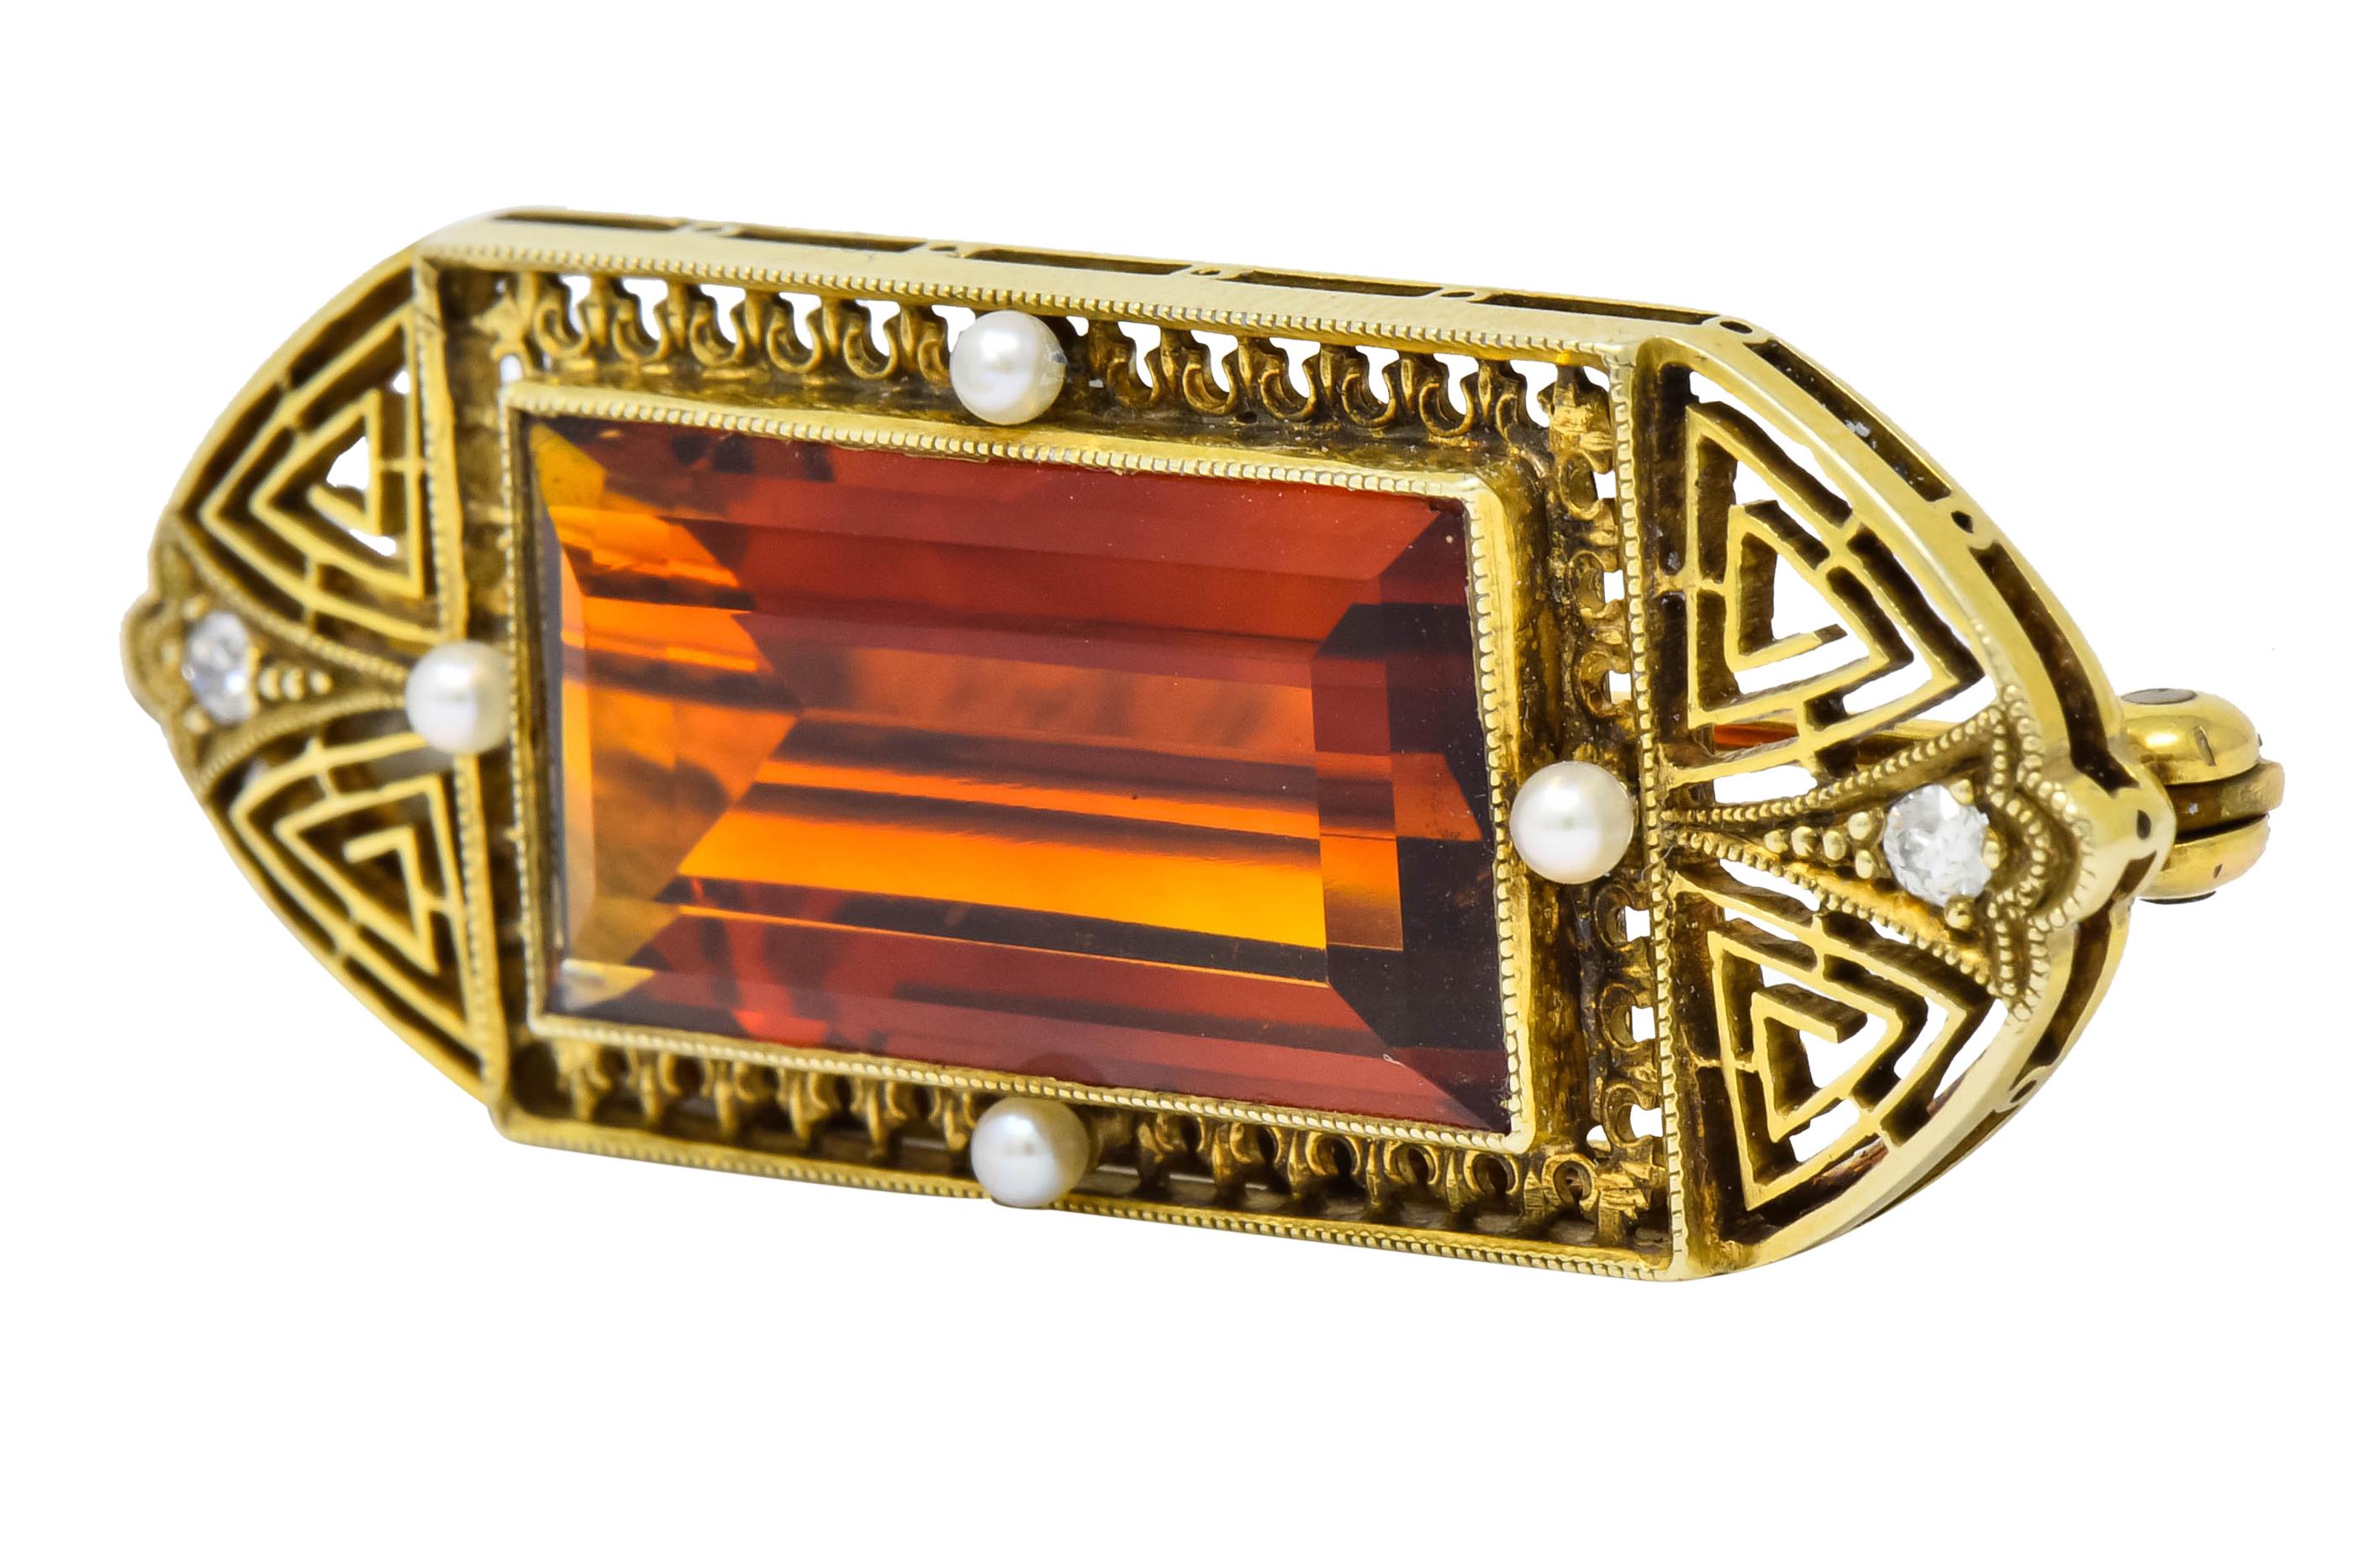 Centering a rectangular step cut citrine weighing approximately 10.41 carats, transparent and a rich medium-dark orange color

Bezel set within a rectangular millegrain frame surrounded by pierced fishtail motif and four round seed pearls

Flanked